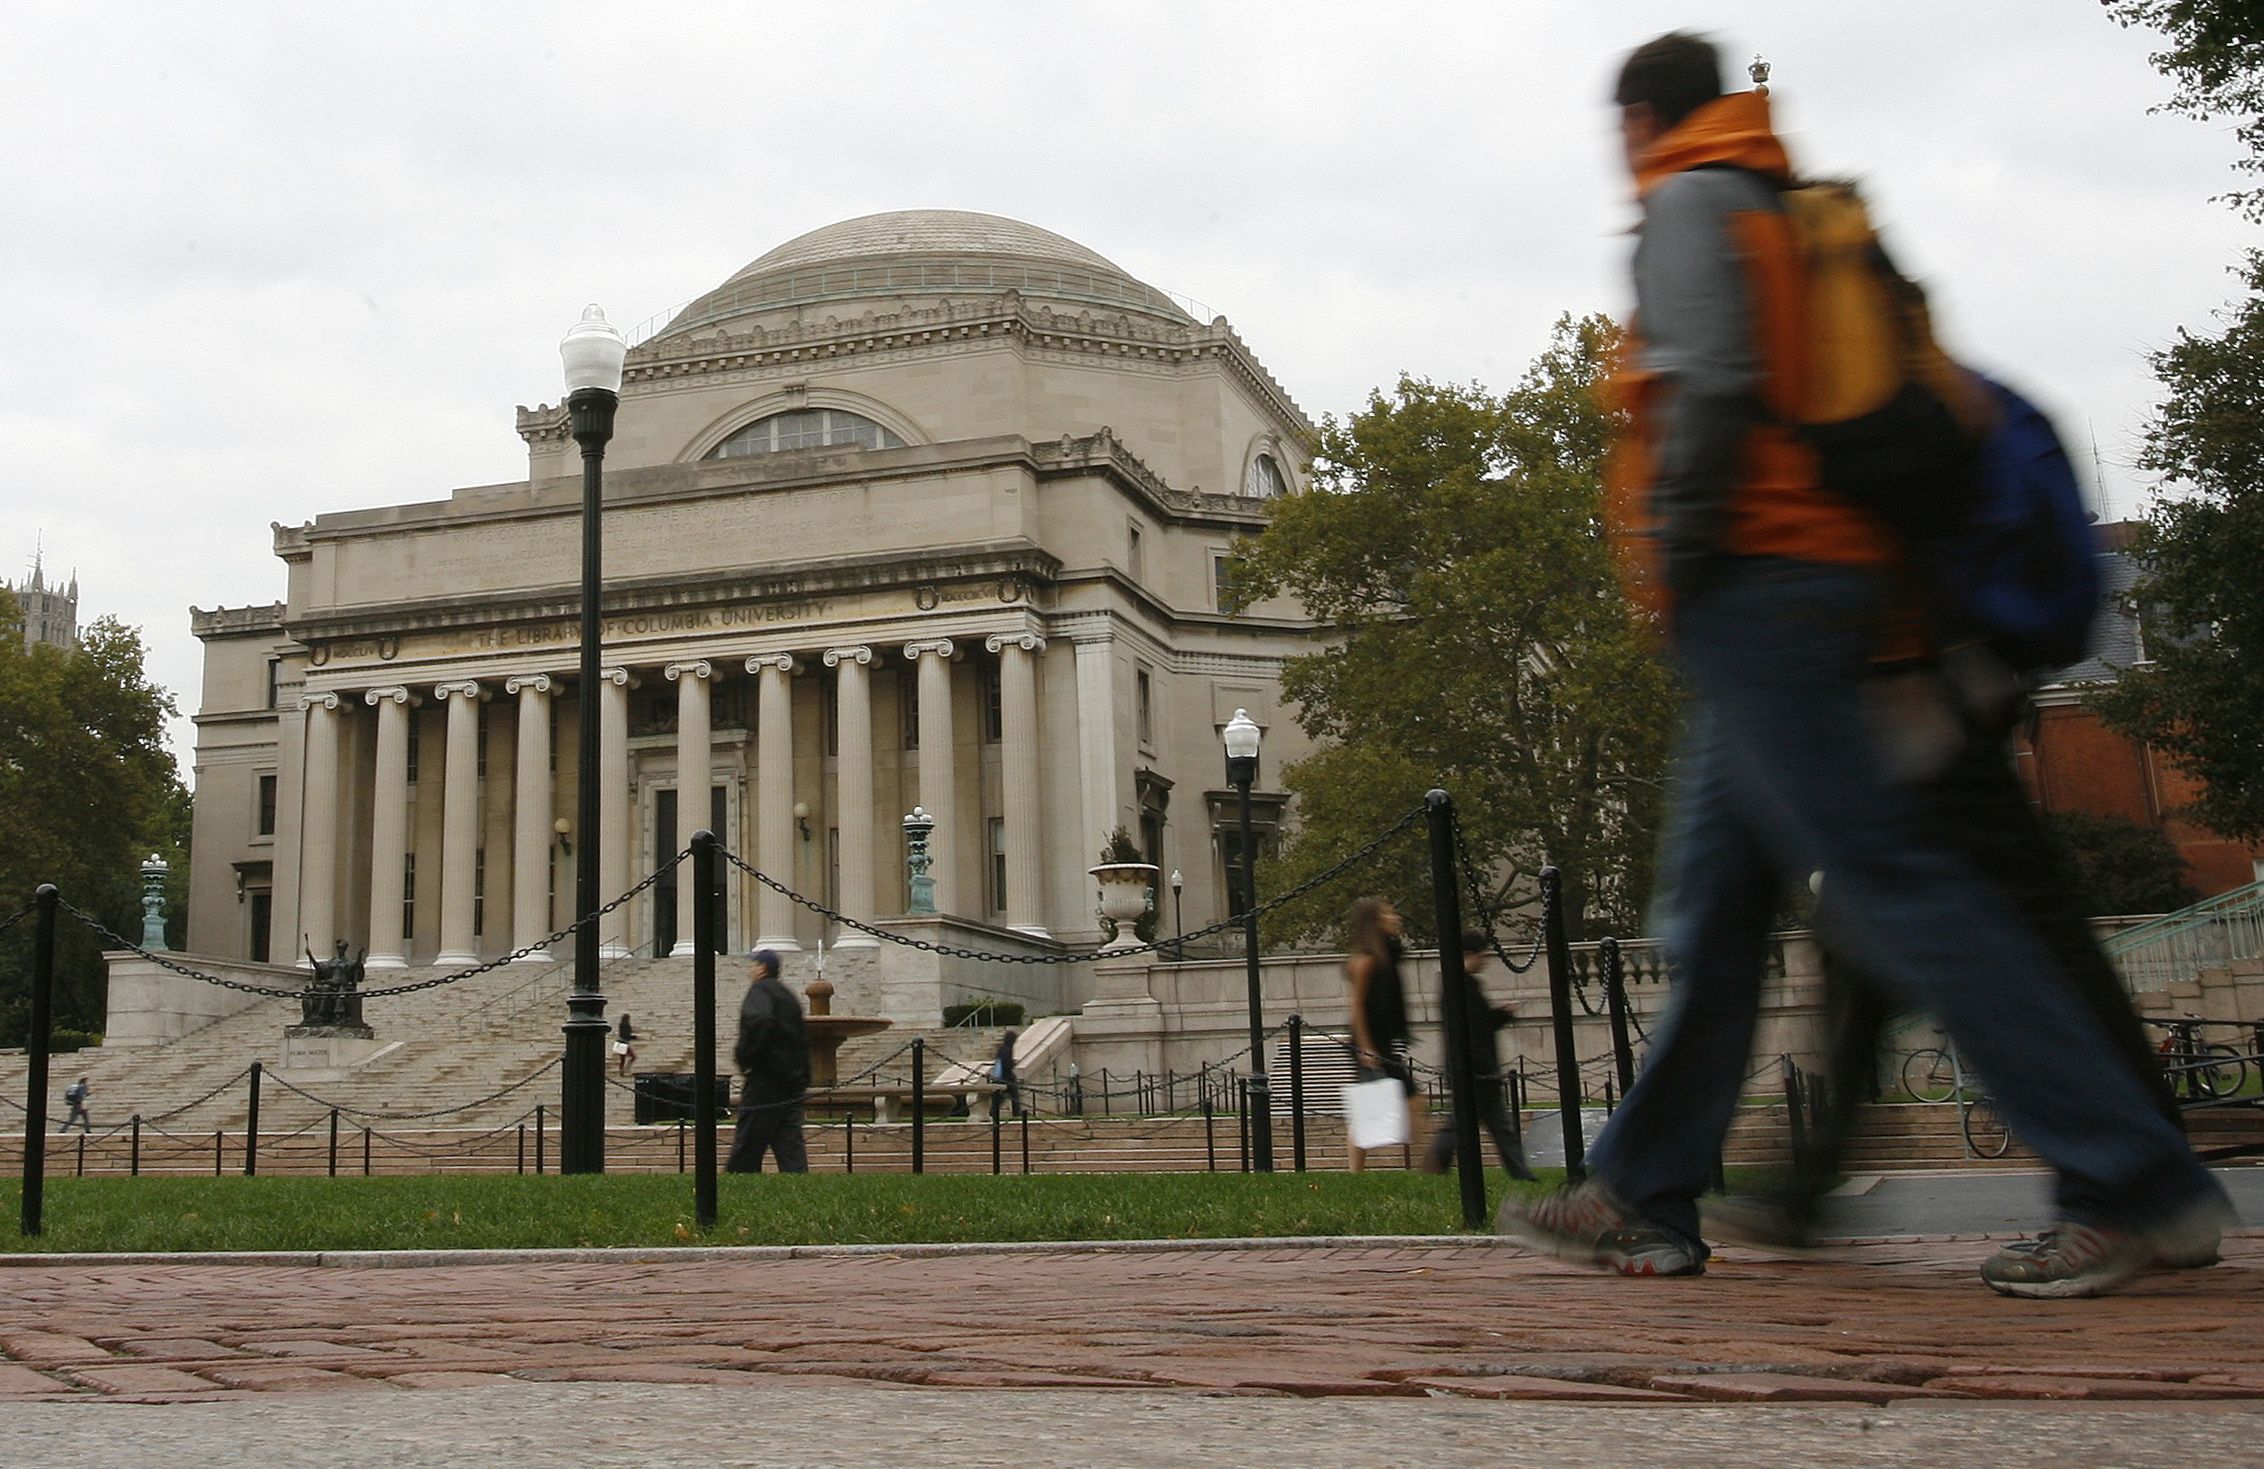 Students walk across the campus of Columbia University in New York in this picture taken October 2, 2009.